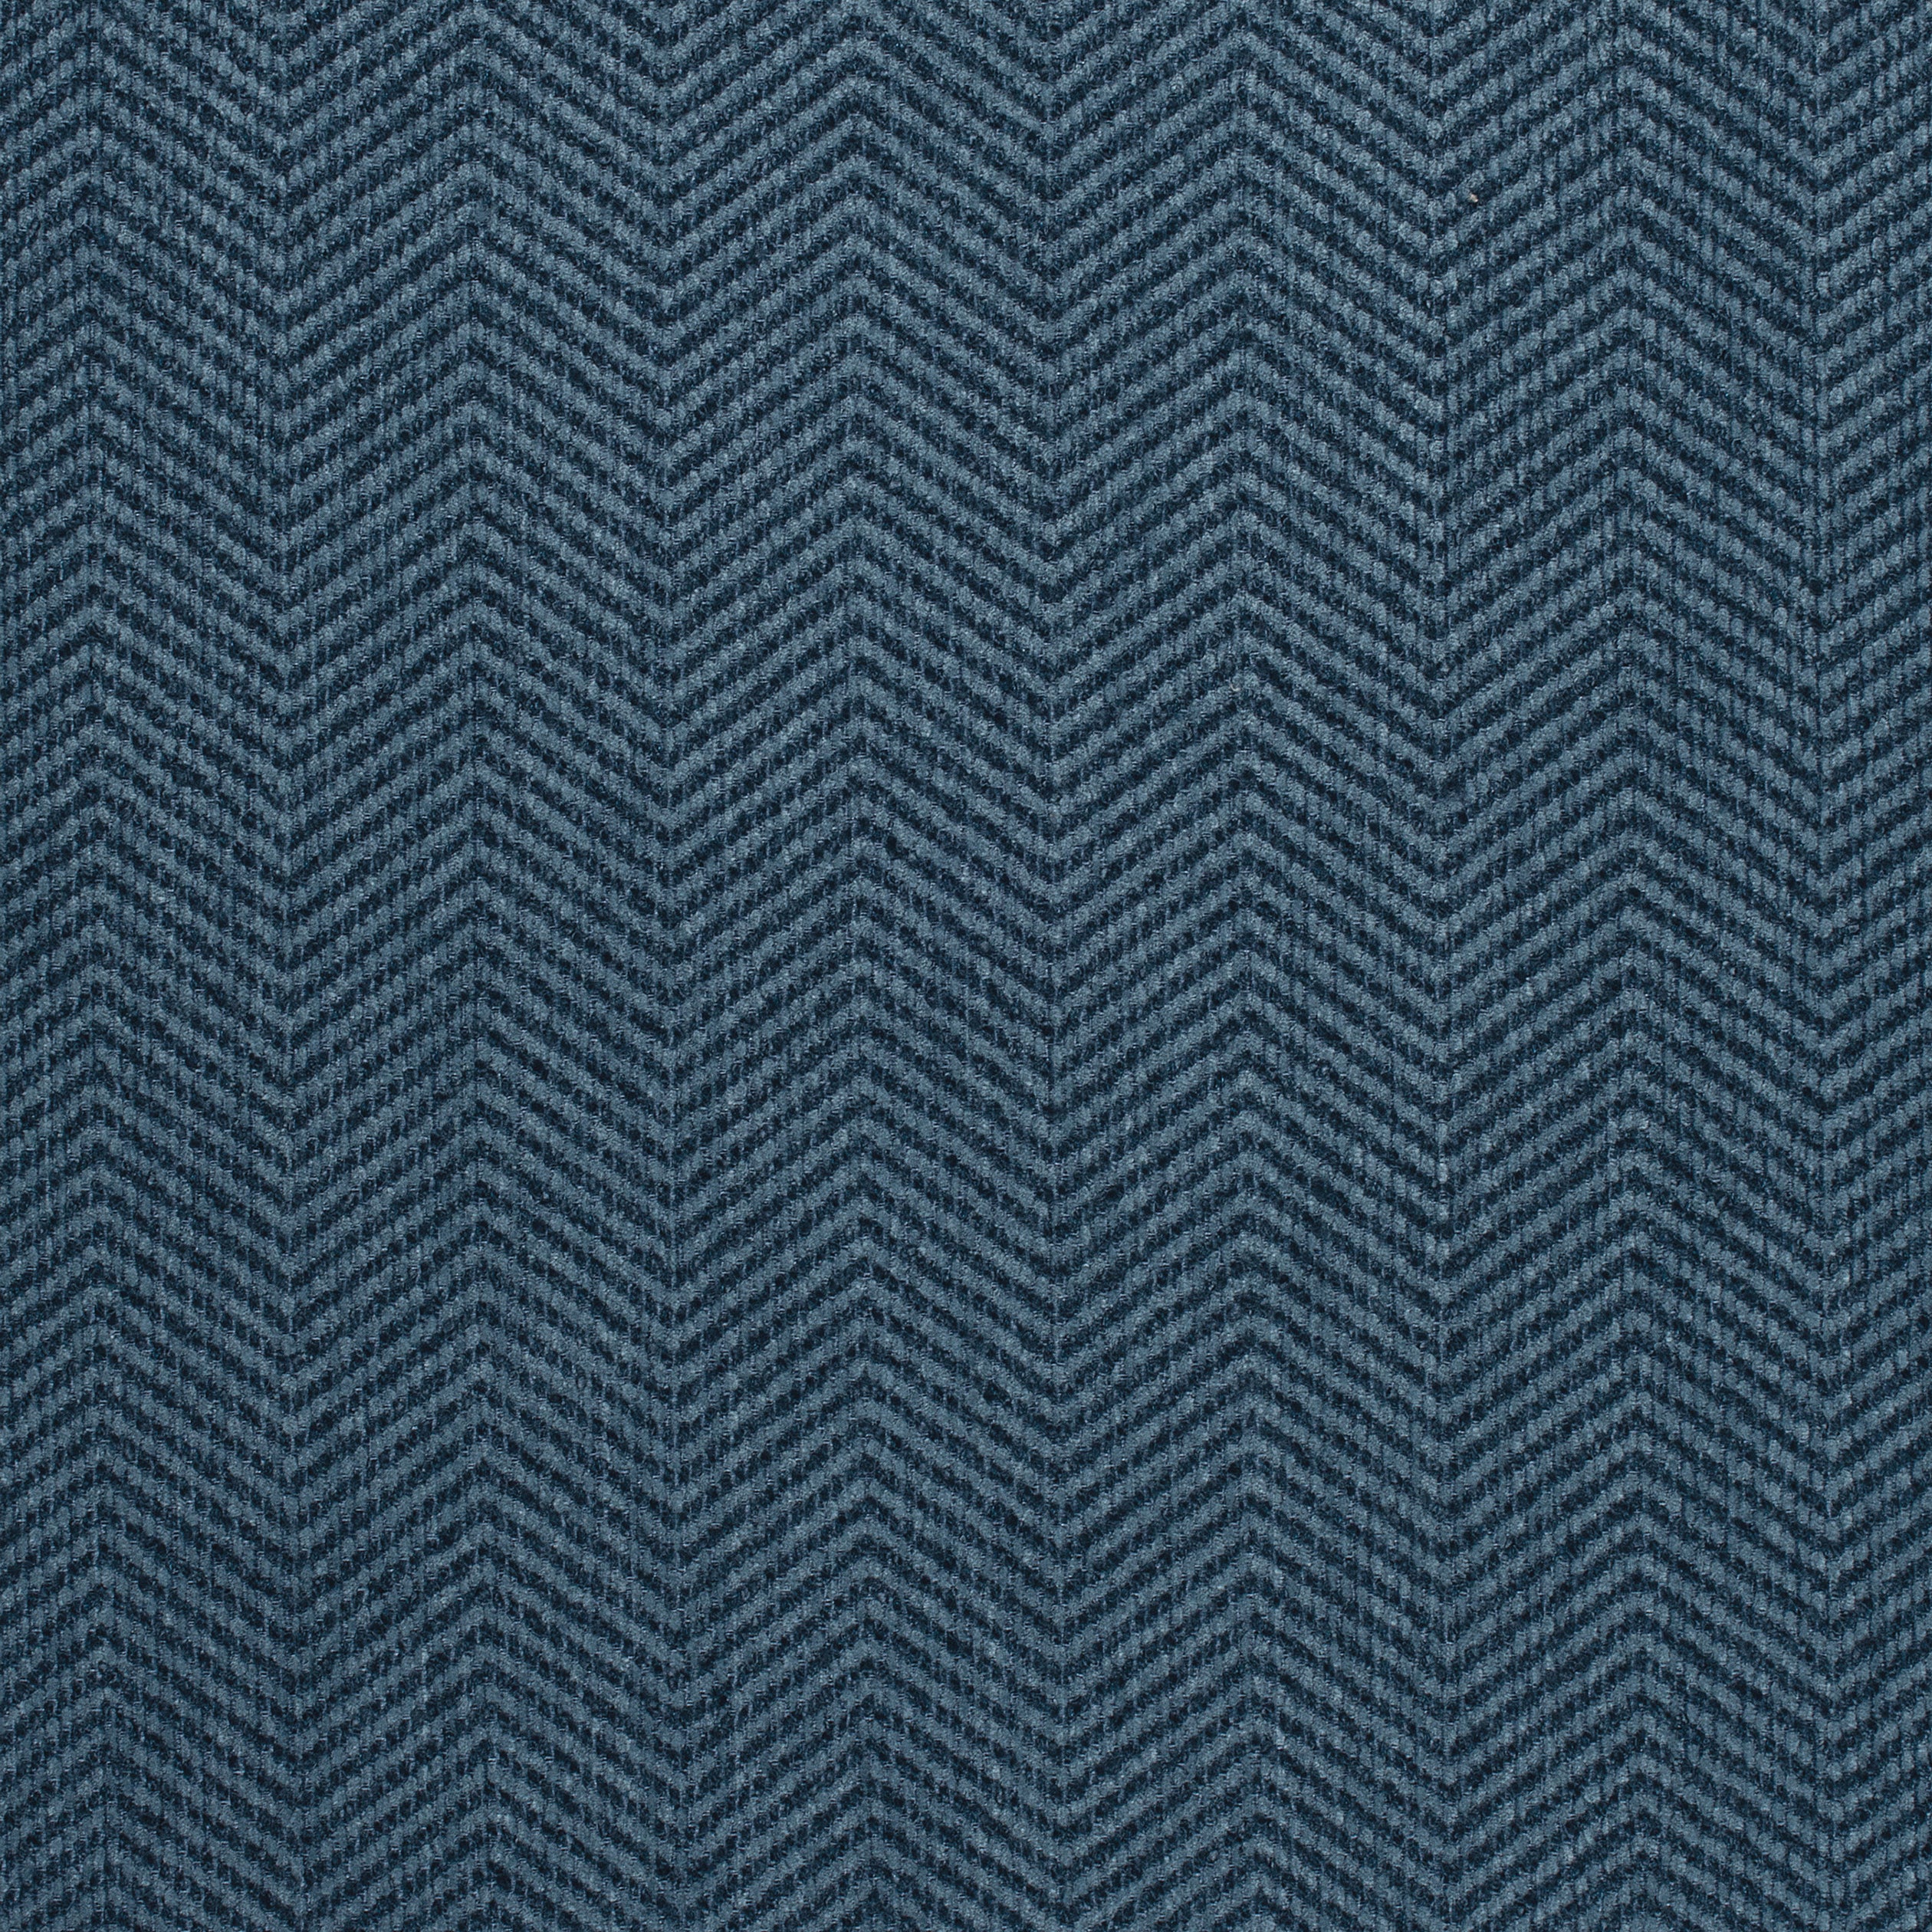 Dalton Herringbone fabric in cadet color - pattern number W80626 - by Thibaut in the Pinnacle collection